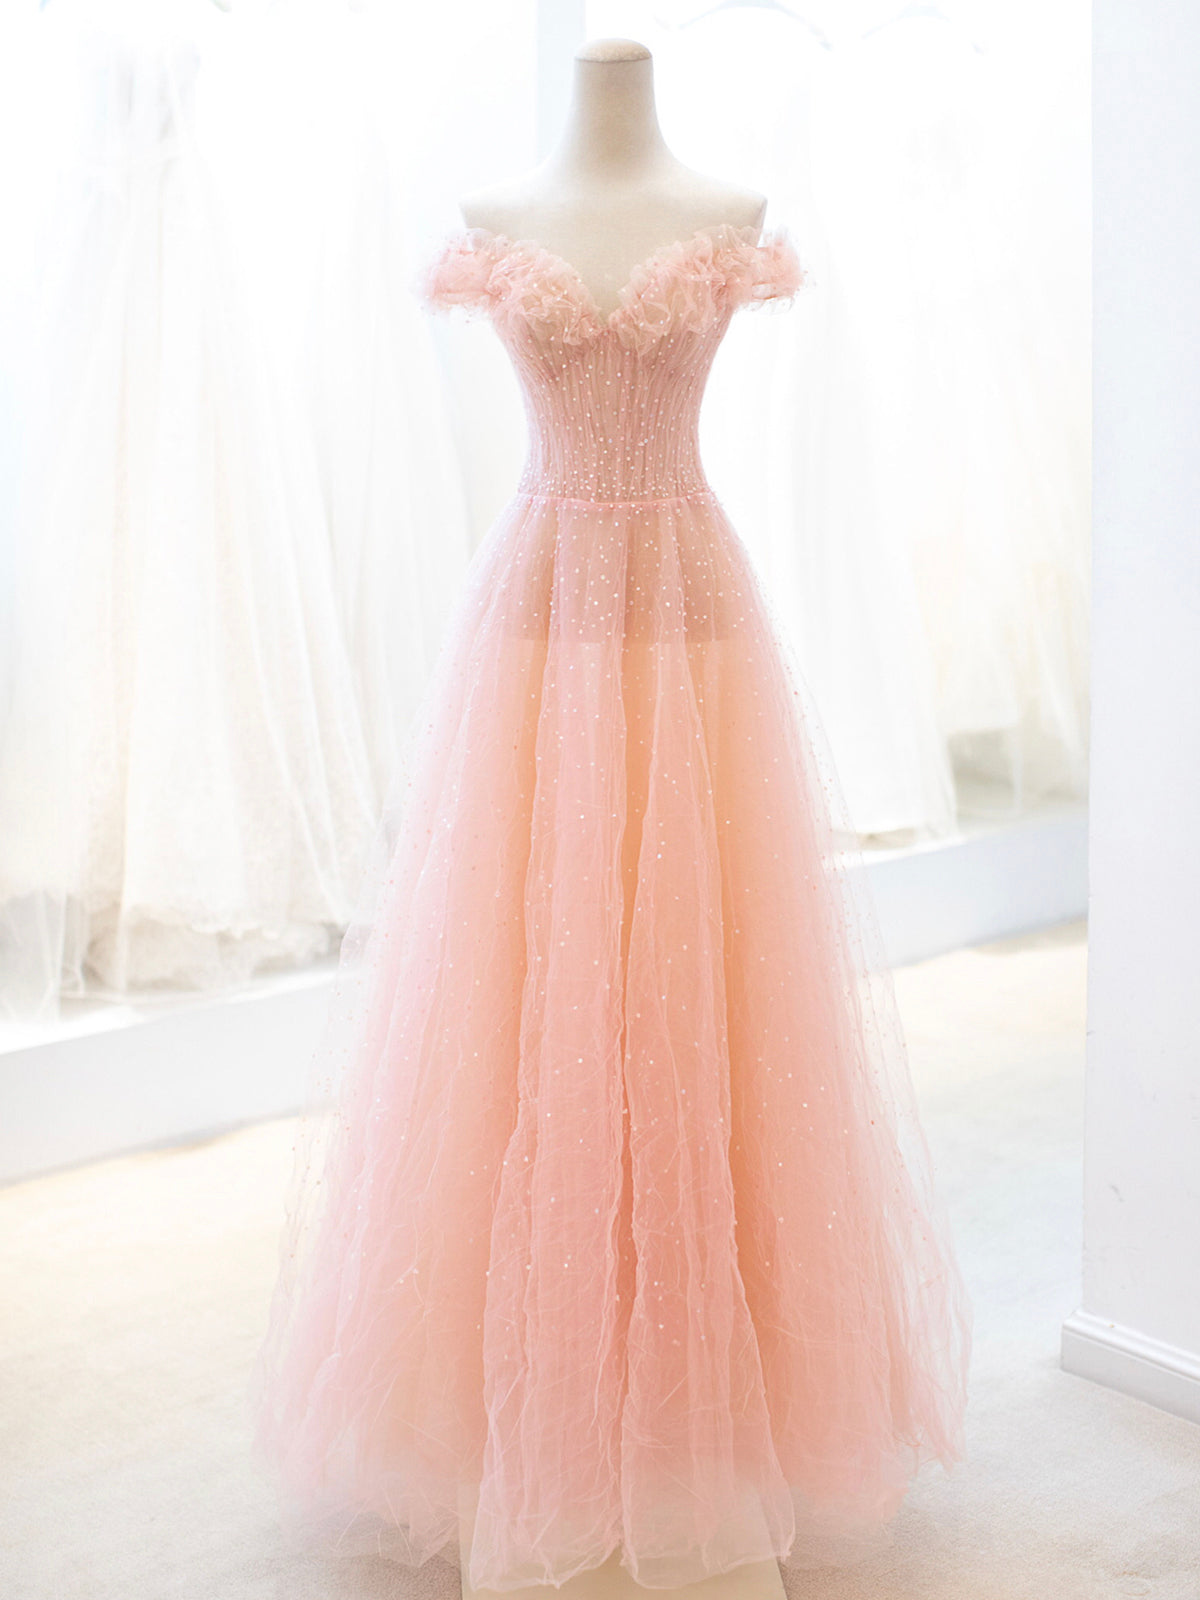 Pink Tulle Sequins Long Prom Dress, A-Line Lovely Evening Party Dress